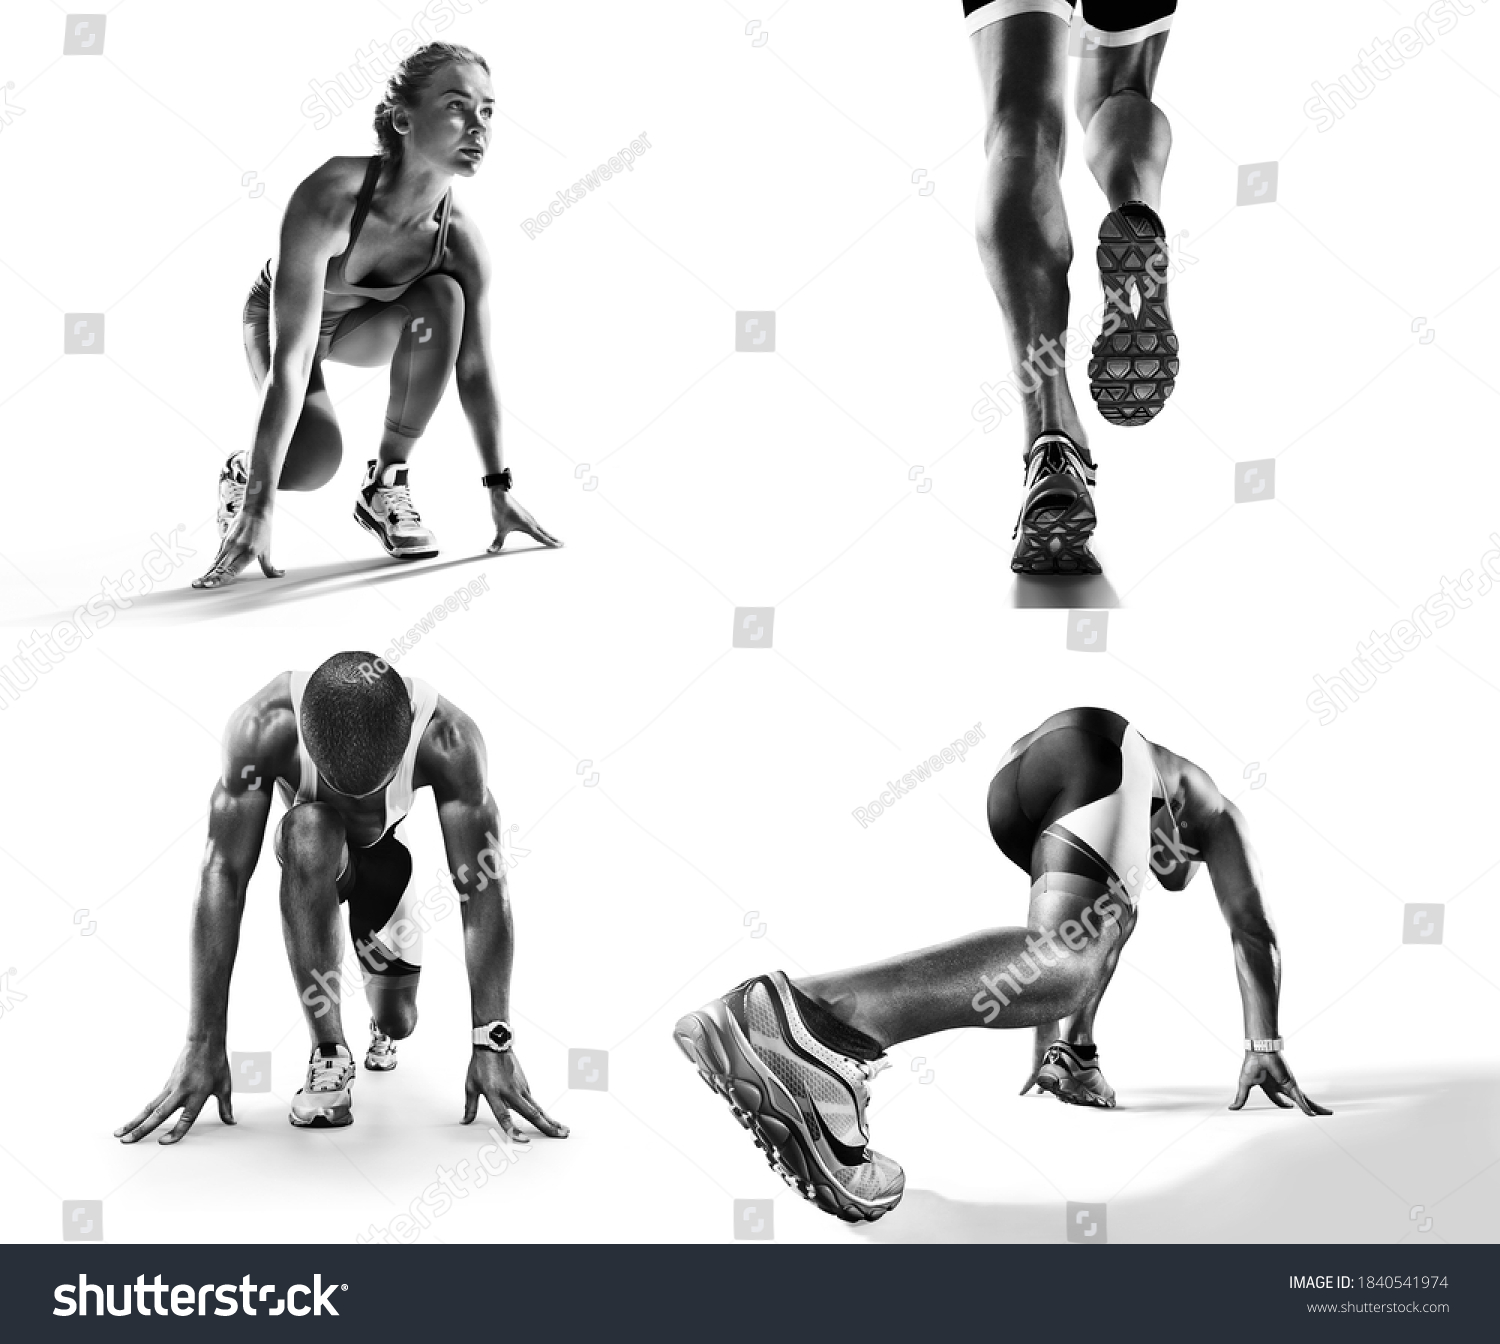 Sports background. Runner feet running on road closeup on shoe. Runner on the start. Black and white image isolated on white. #1840541974